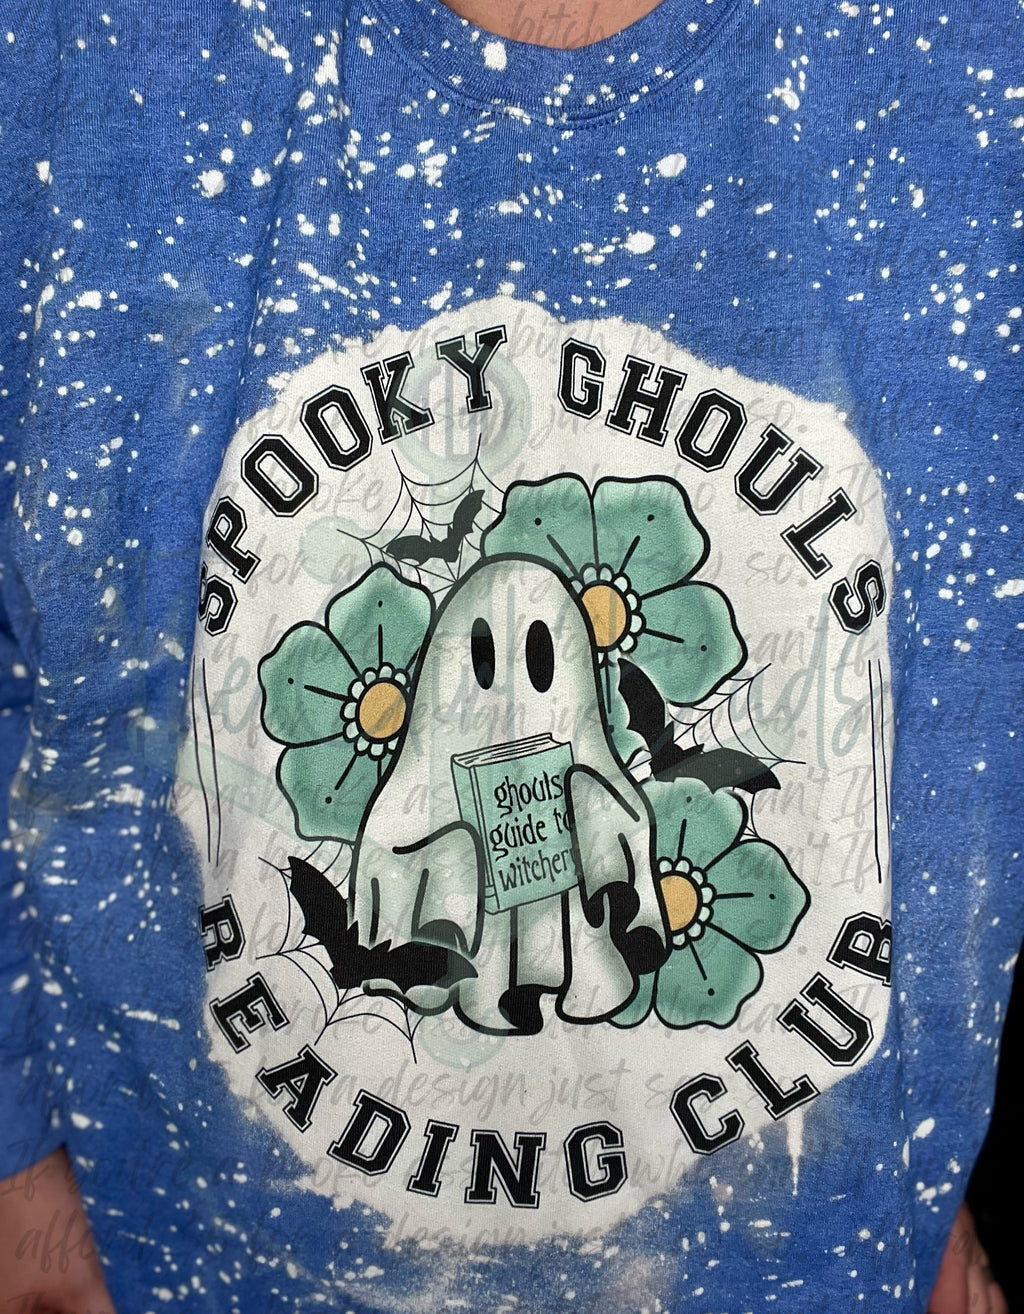 Spooky Ghouls Reading Club Top Design